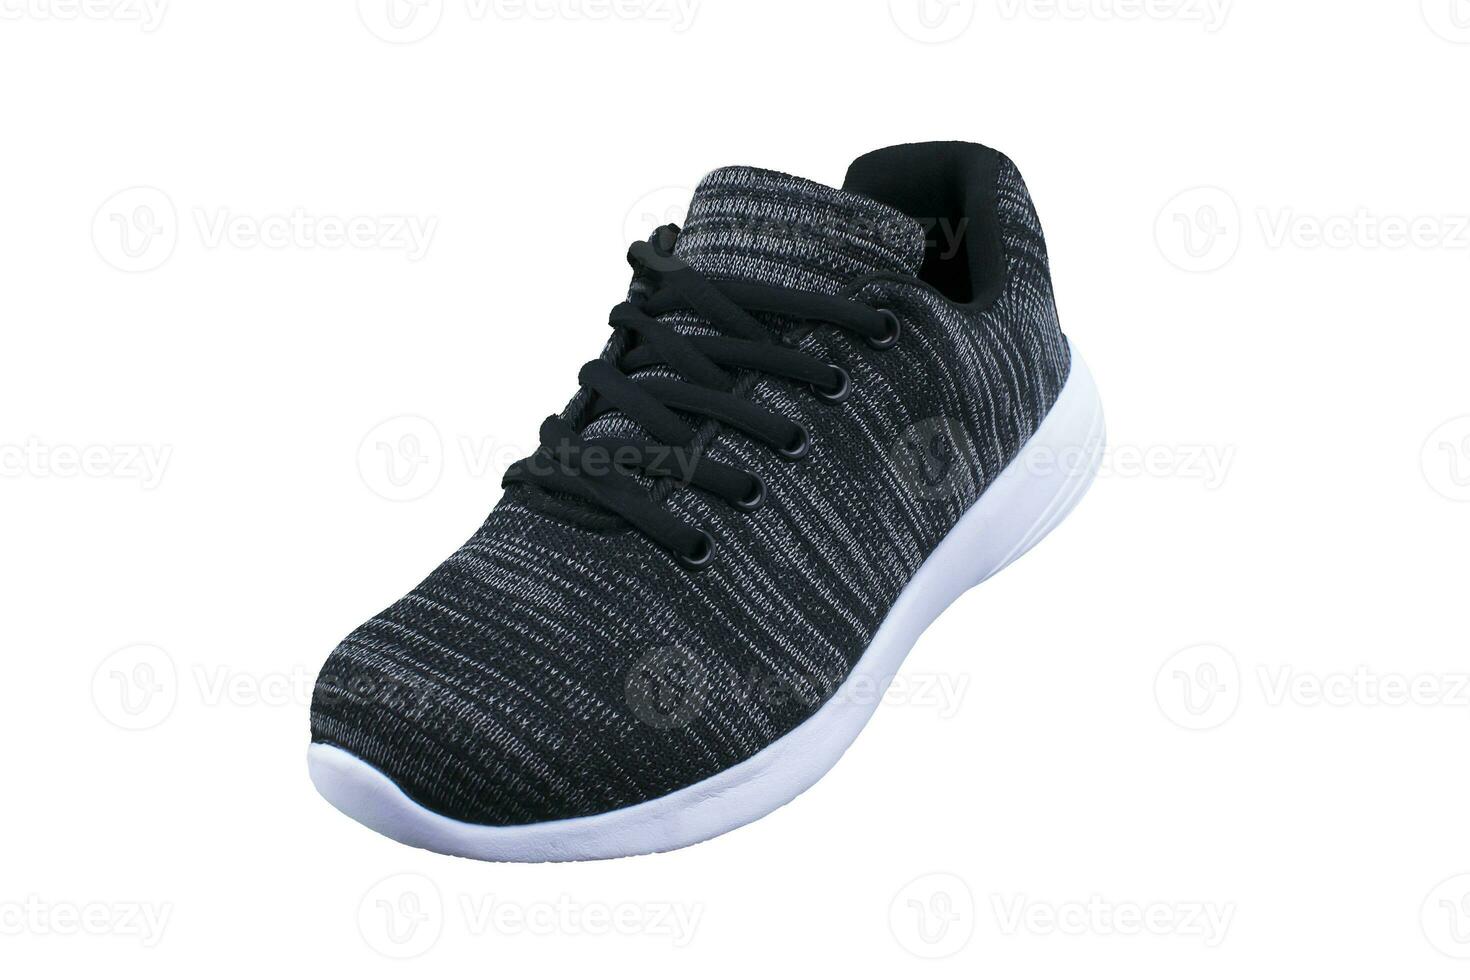 Sneaker gray black. Sport shoes on white background photo